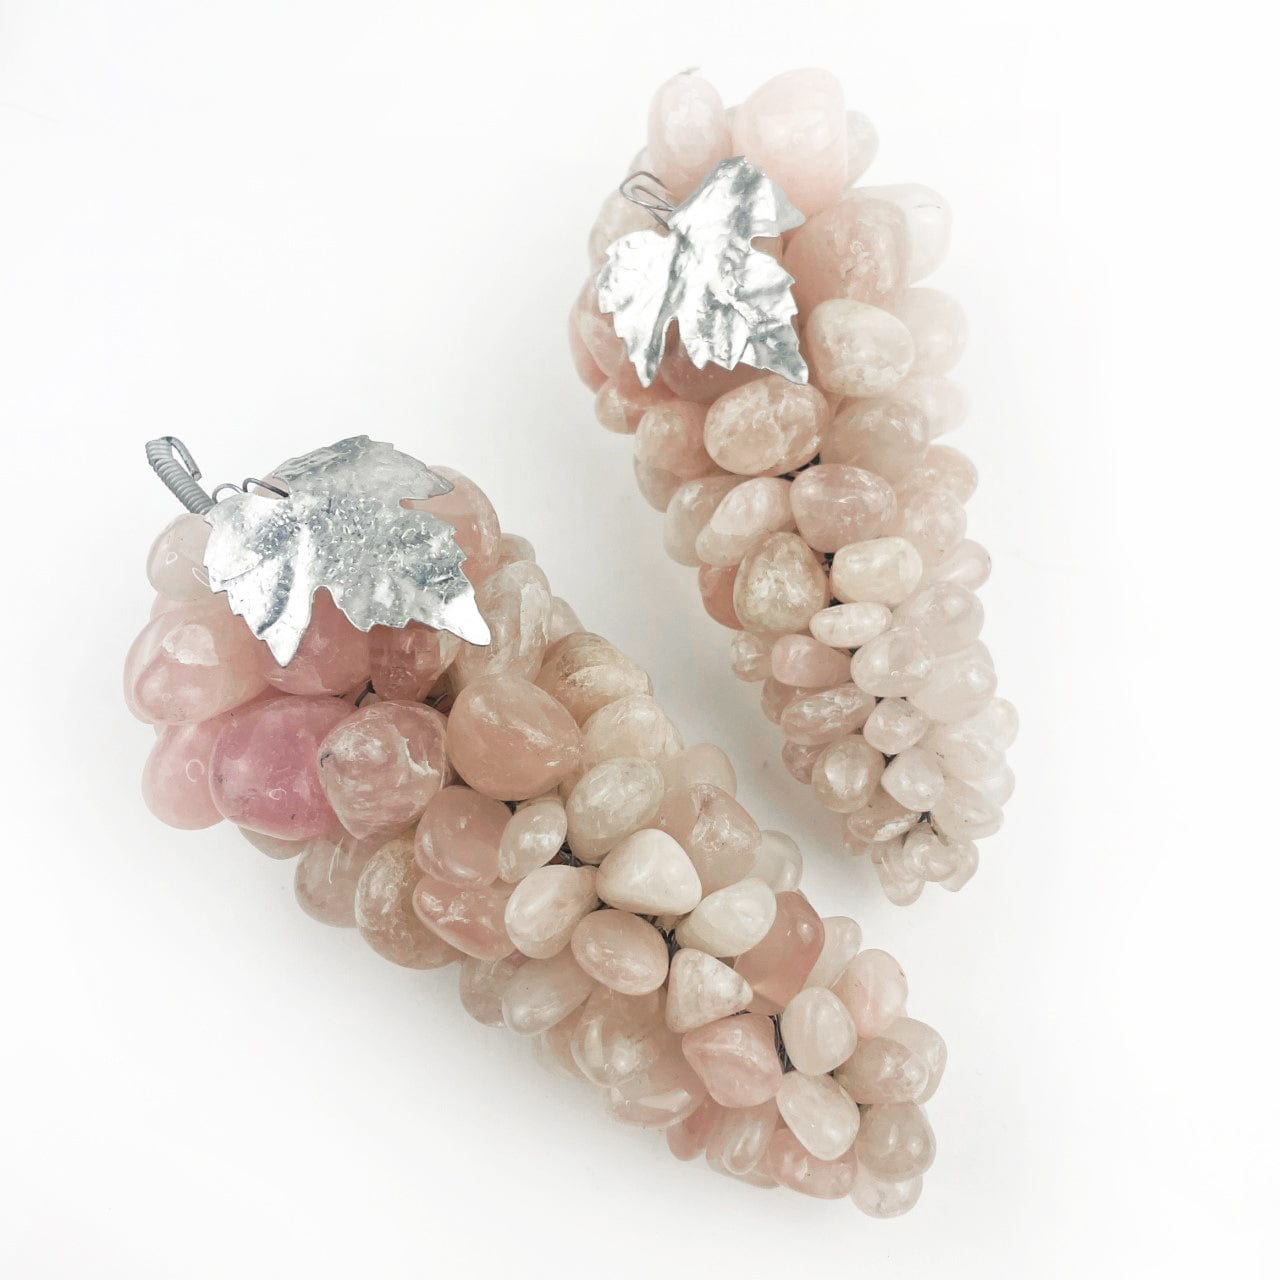 2 rose quartz Large Polished Stone Grape Bunches with Silver Leaf